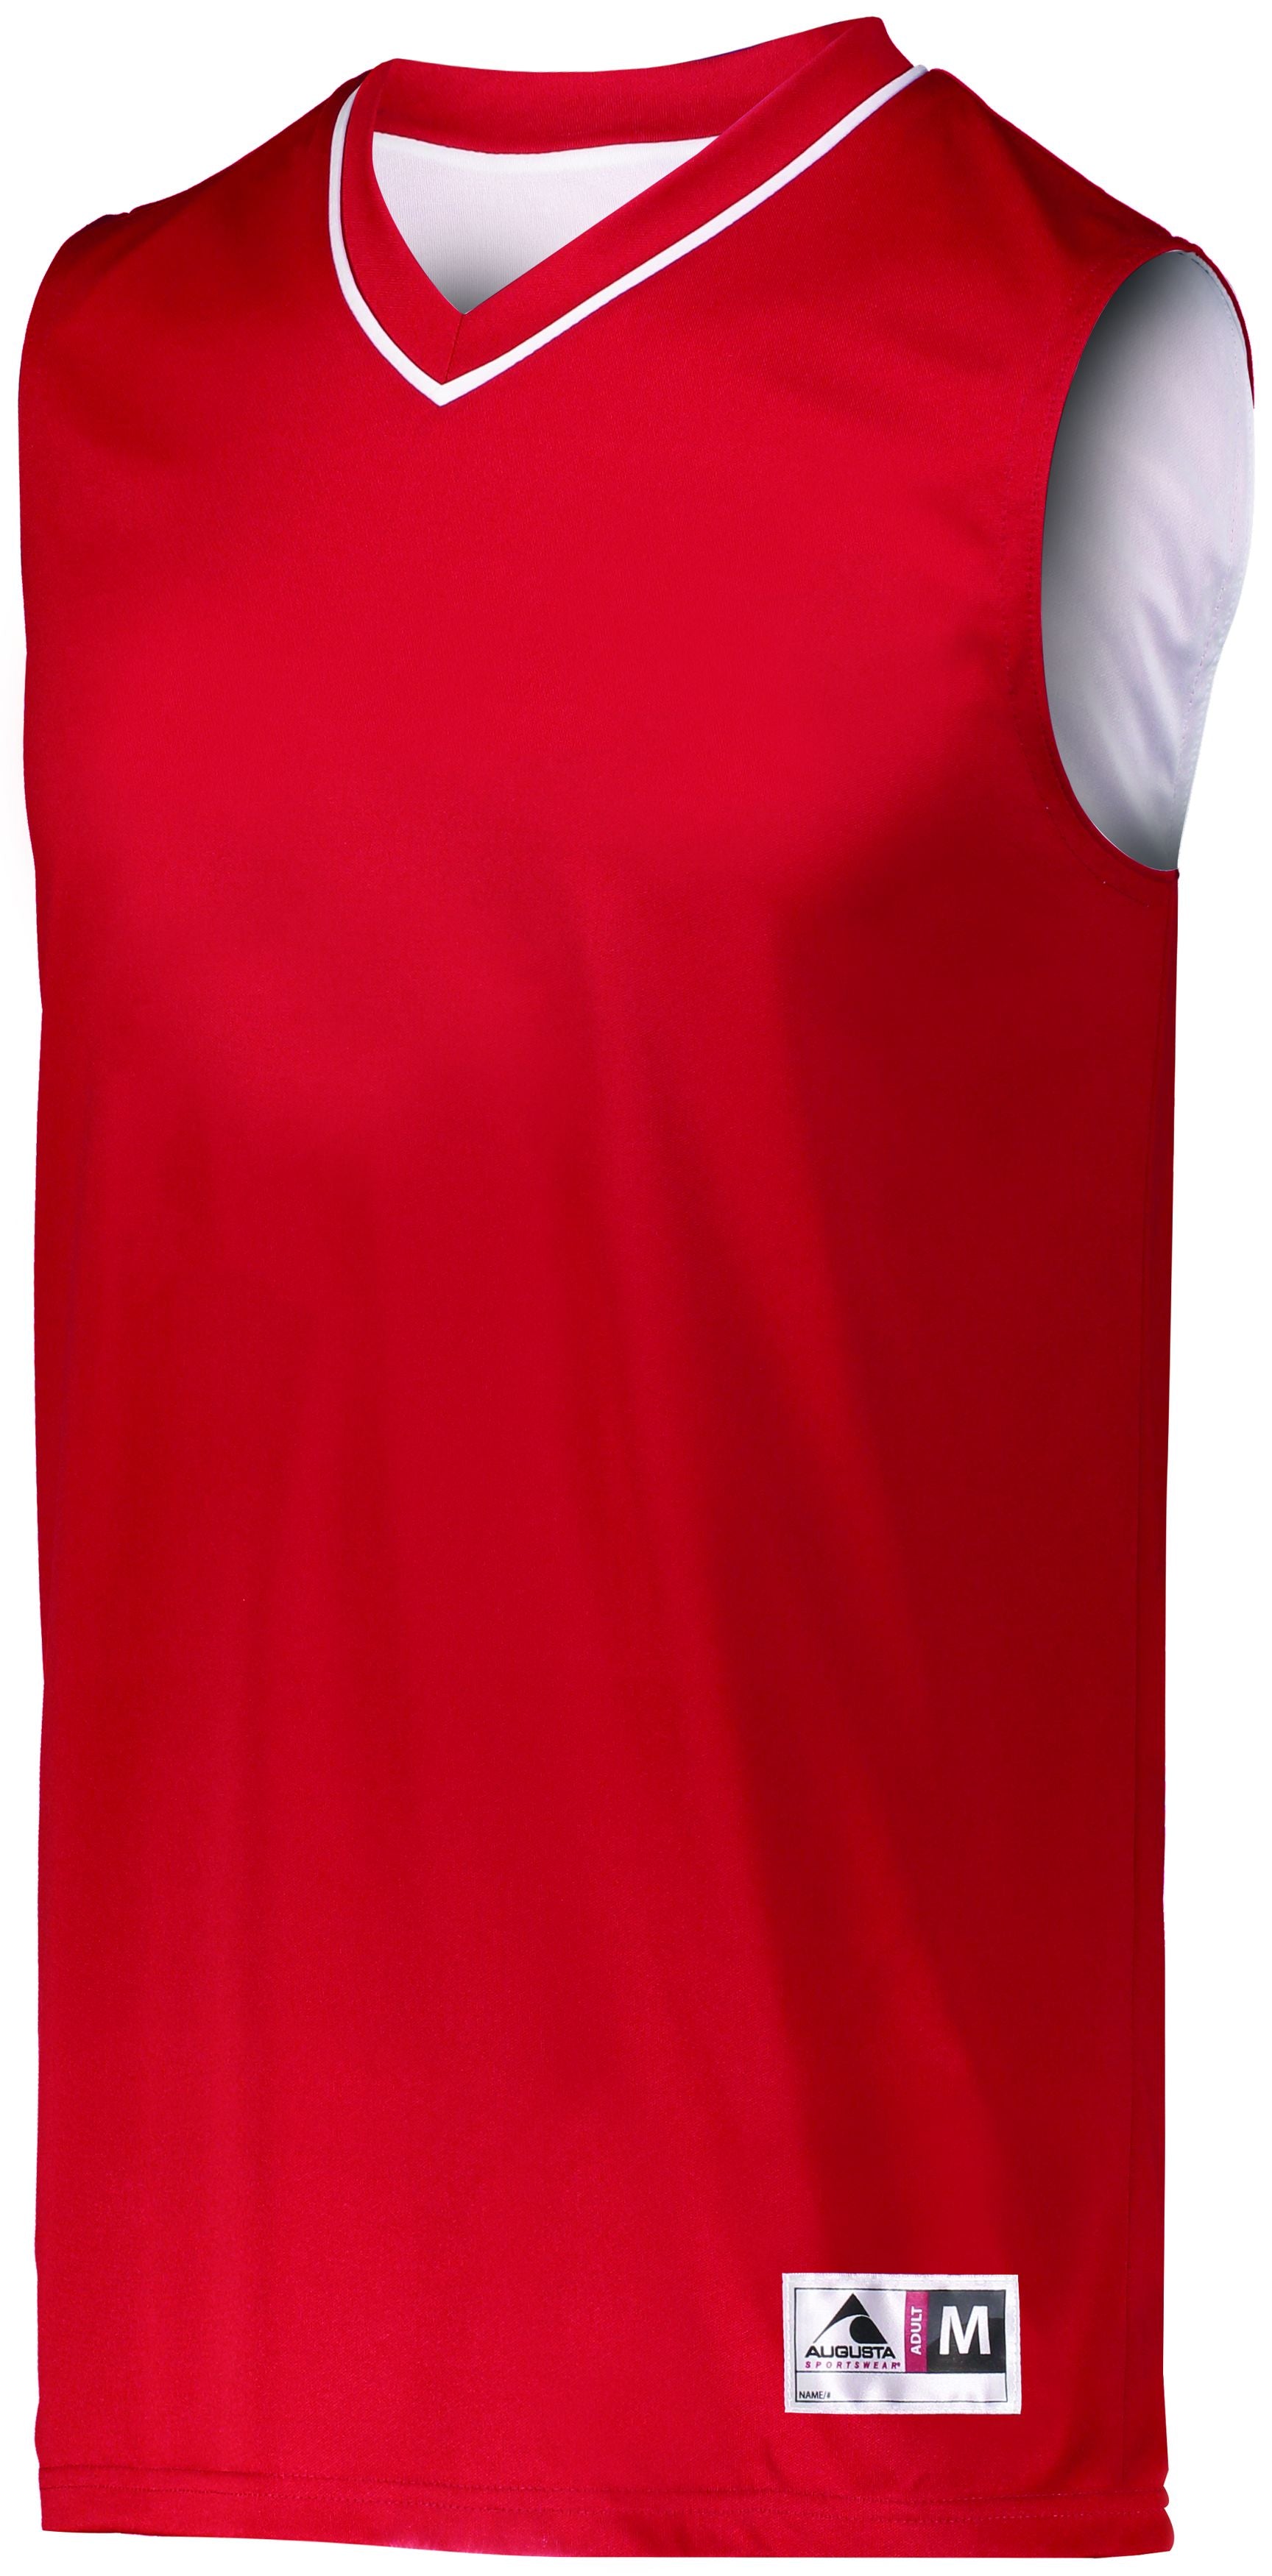 Augusta Sportswear Reversible Two-Color Jersey in Red/White  -Part of the Adult, Adult-Jersey, Augusta-Products, Basketball, Shirts, All-Sports, All-Sports-1 product lines at KanaleyCreations.com